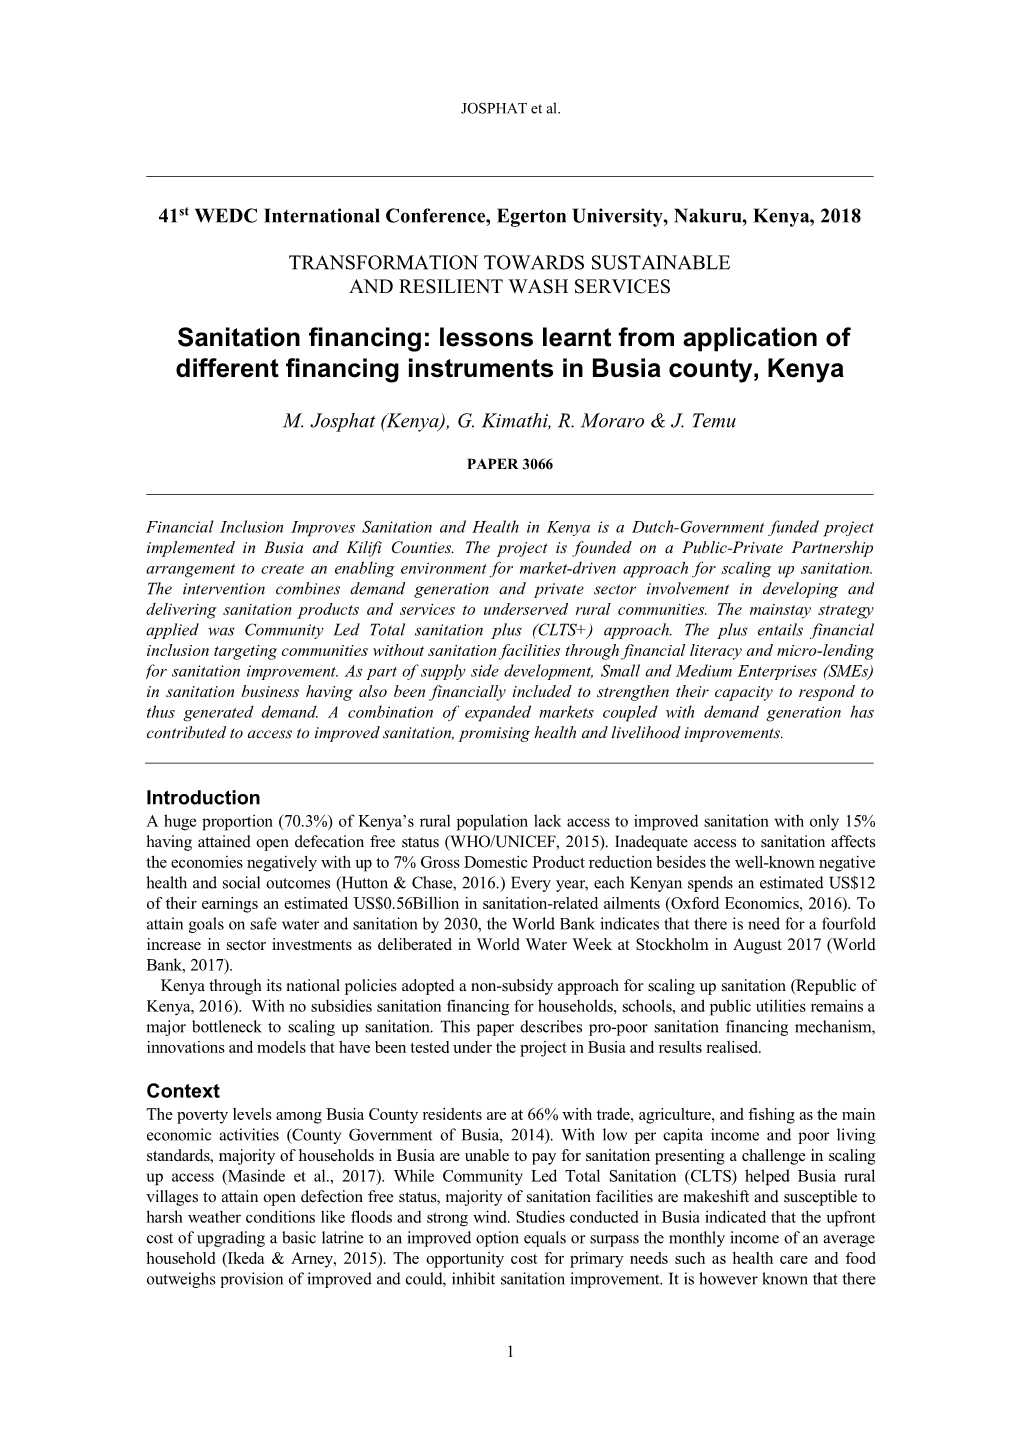 Sanitation Financing: Lessons Learnt from Application of Different Financing Instruments in Busia County, Kenya